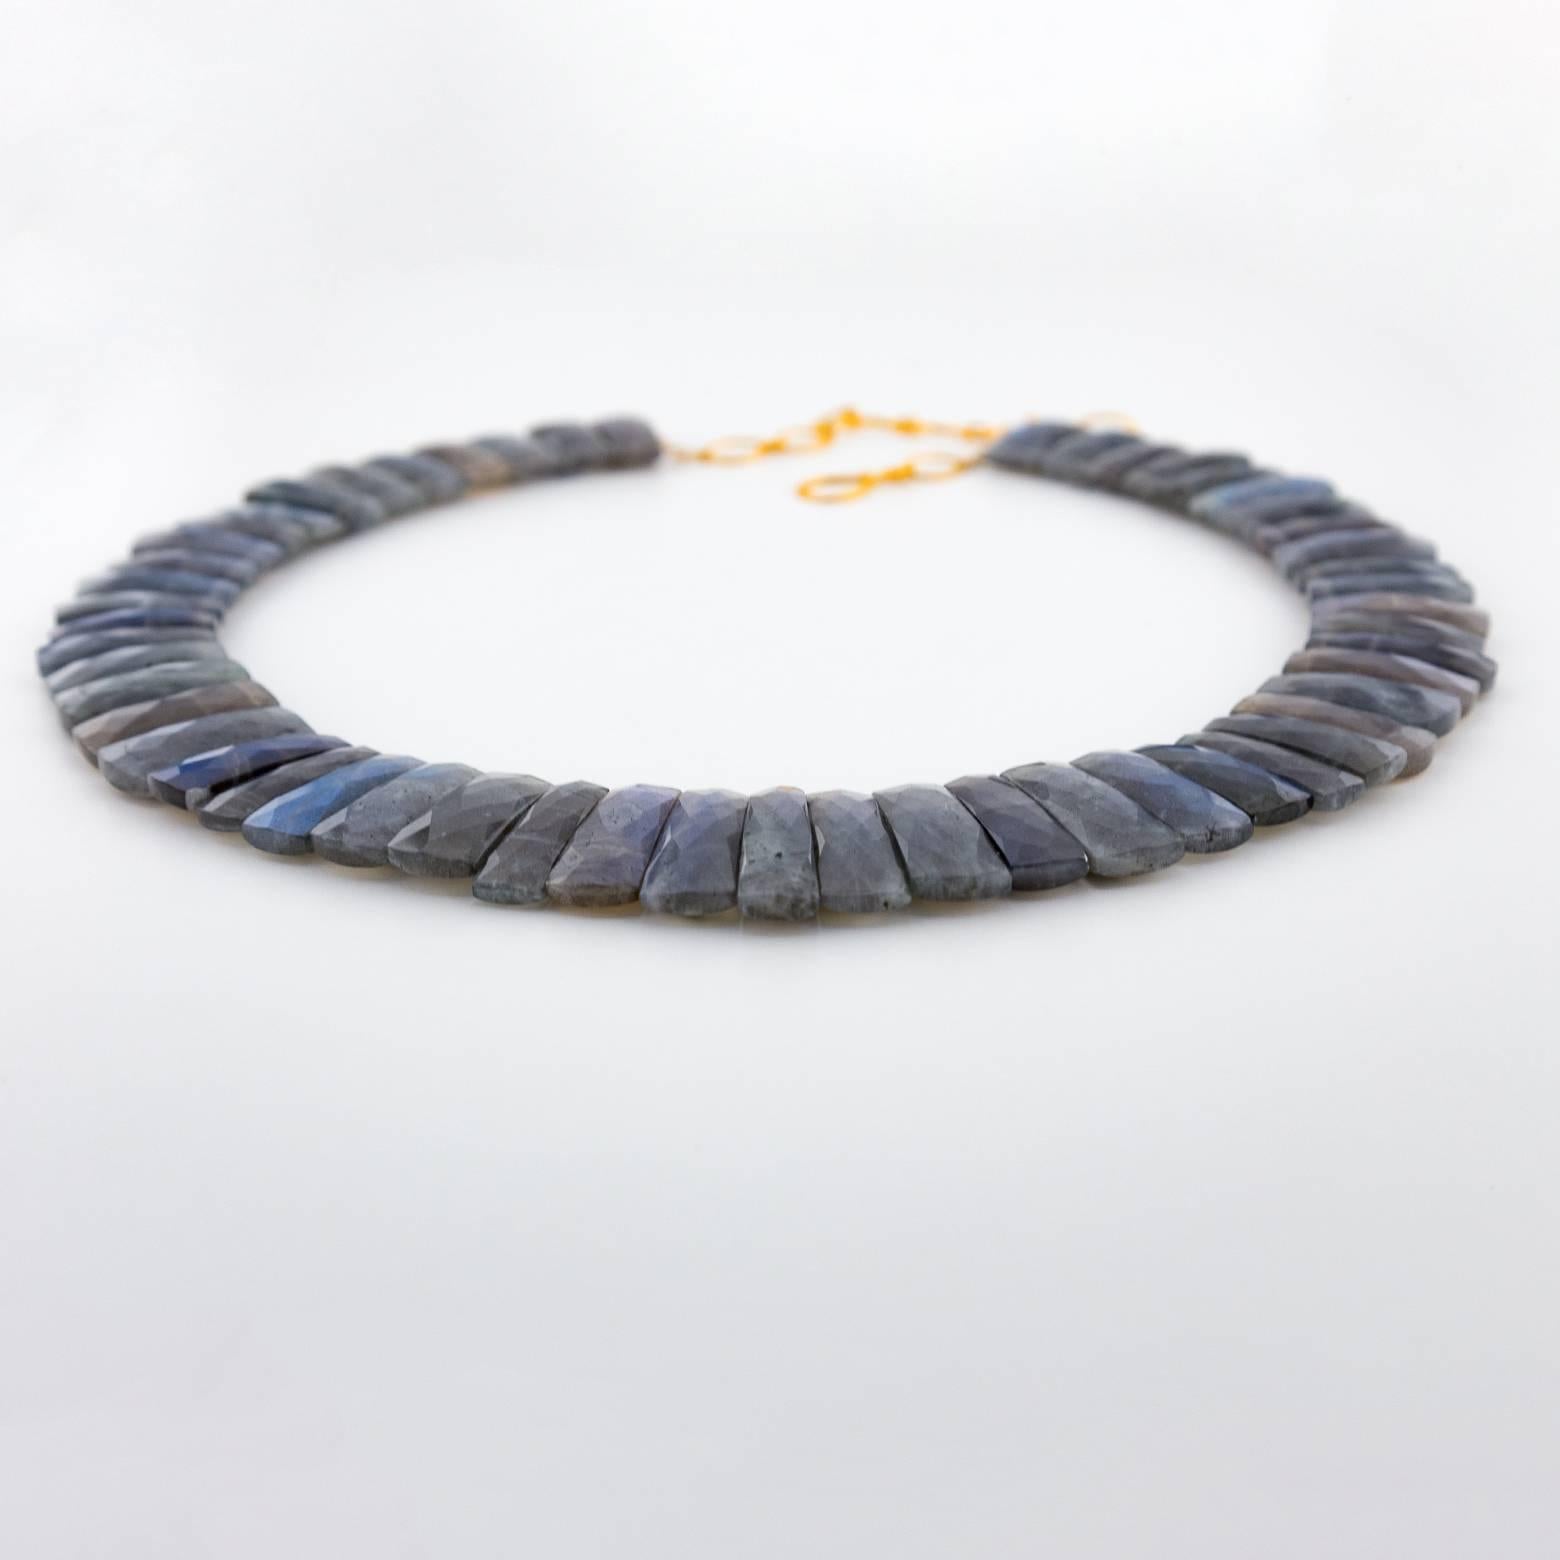 This beautiful Labradorite necklace is natural elegance. It has a great weight to it. The iridescence of it captures the light is so many different angles that the blue tones absolutely glow! Very regal and very elegant! The clasp and chain are 14